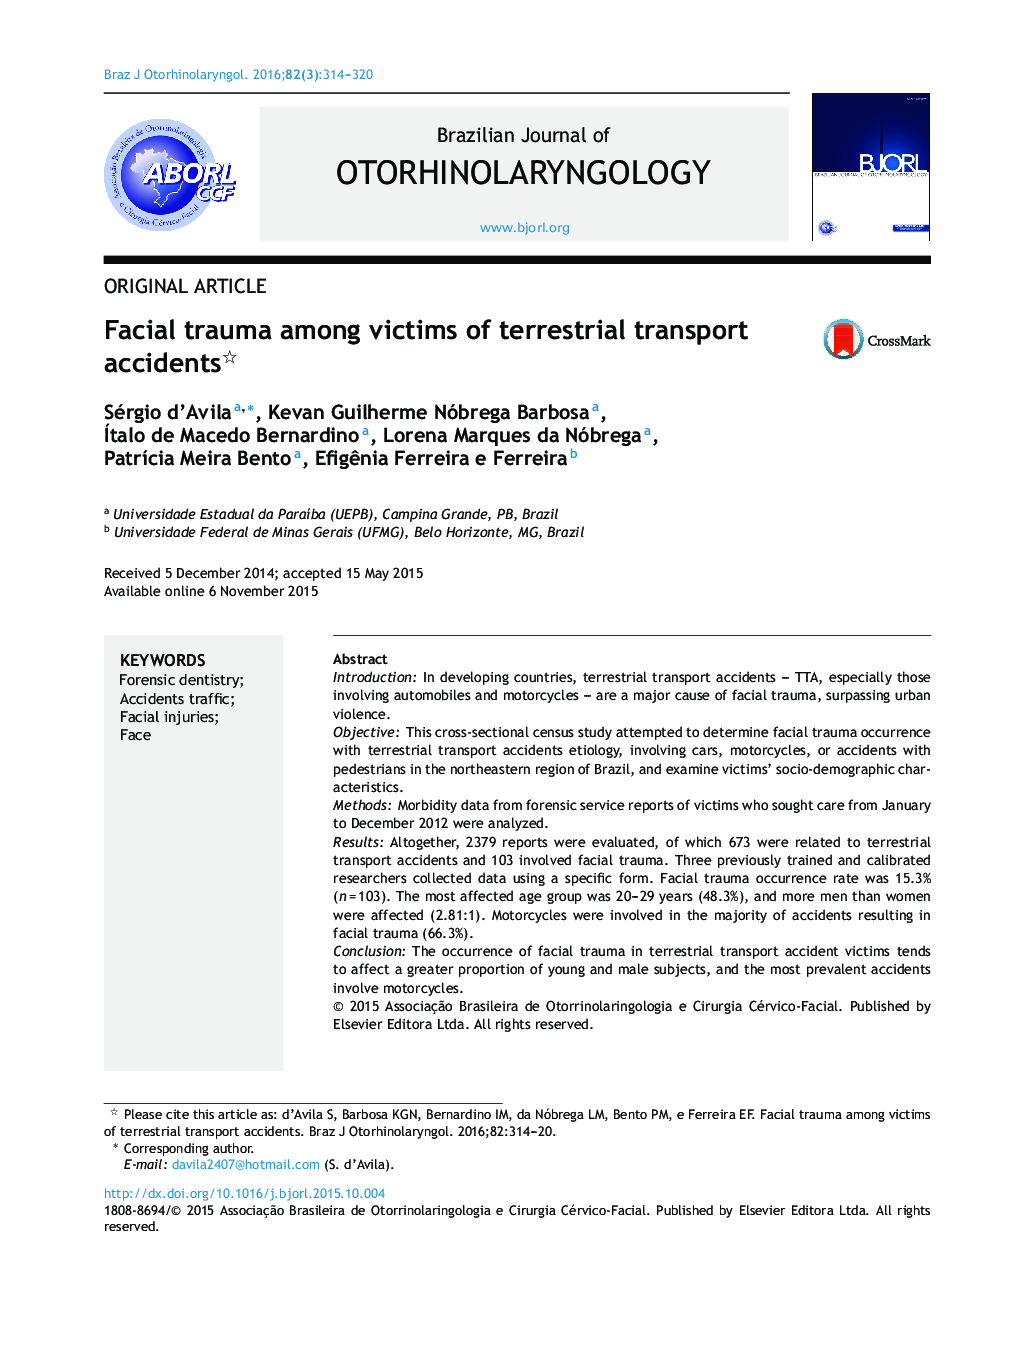 Facial trauma among victims of terrestrial transport accidents 